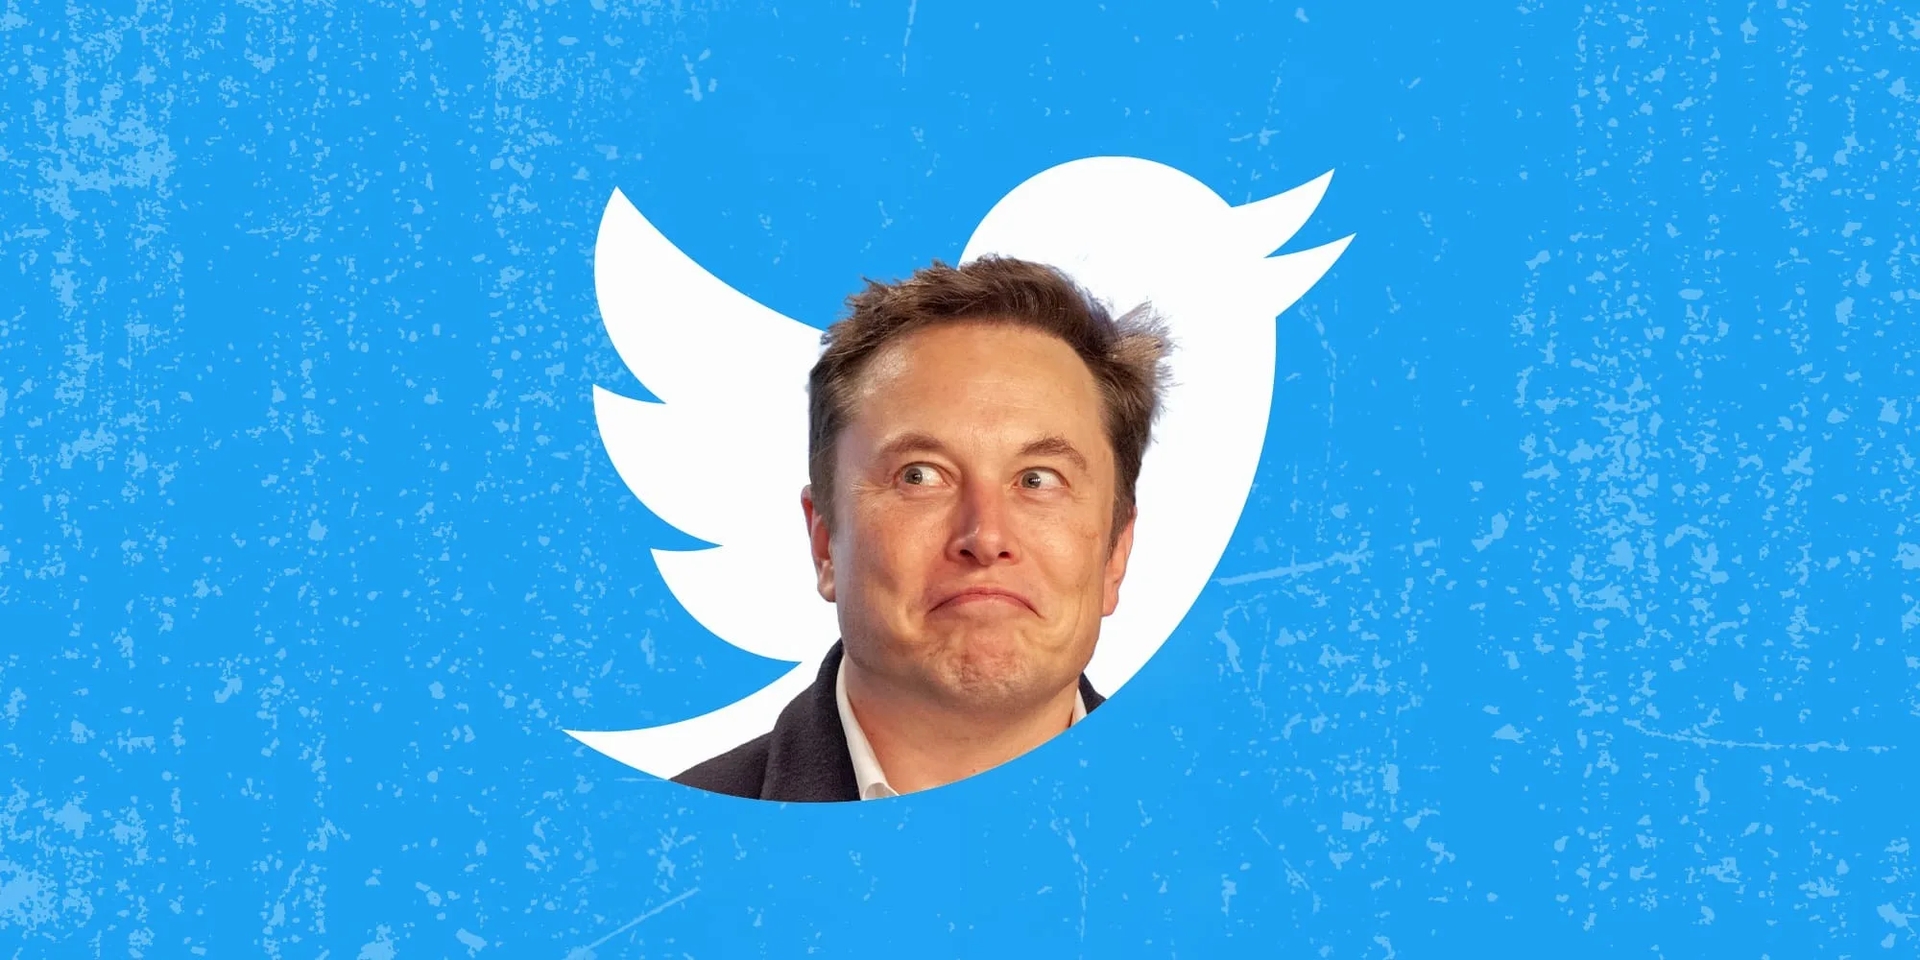 The chaos at the offices of the popular social media hasn't ended as Elon Musk fired more Twitter employees just before Thanksgiving, saying these will be...